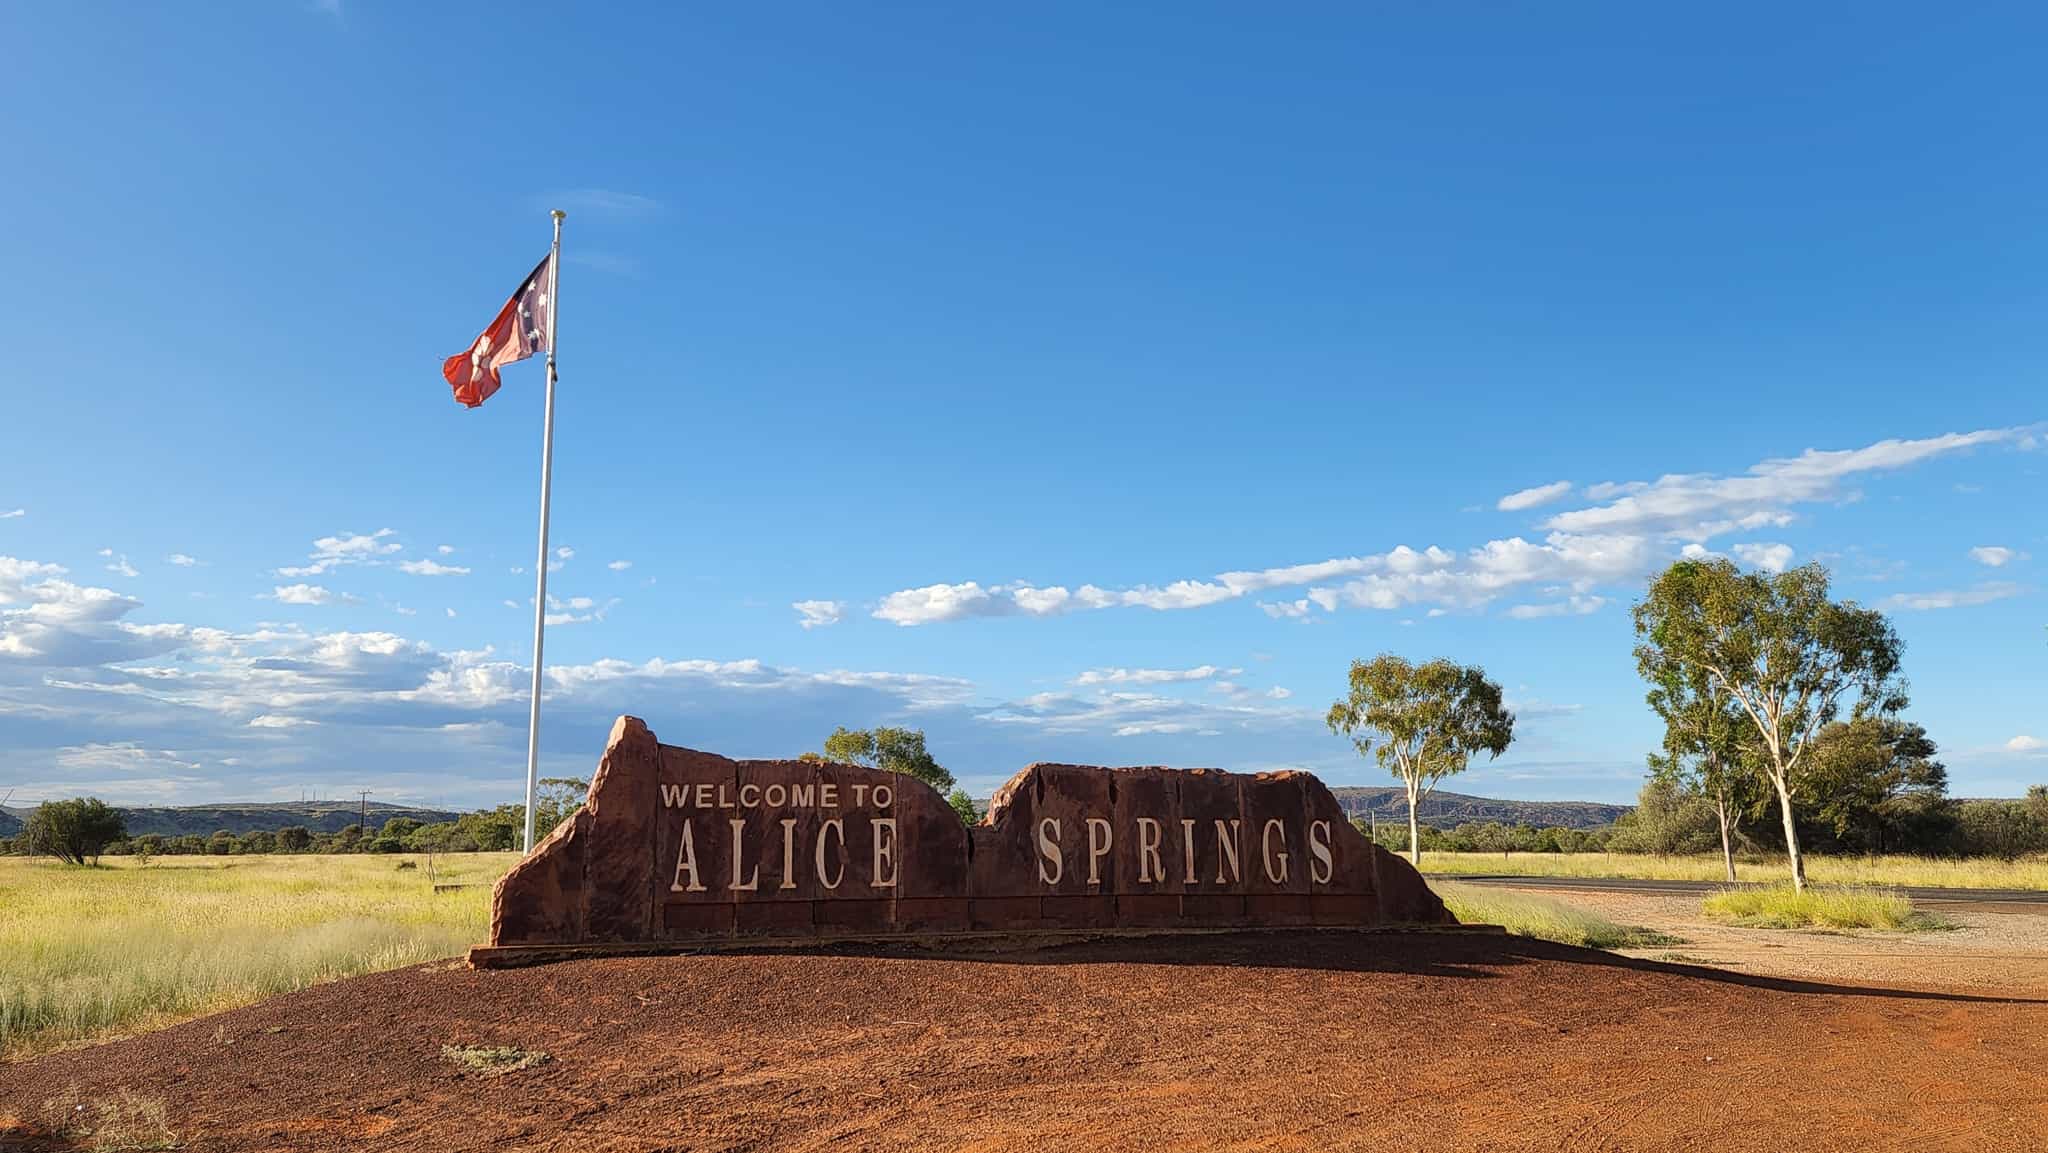 Carpentaria commits to Alice Springs